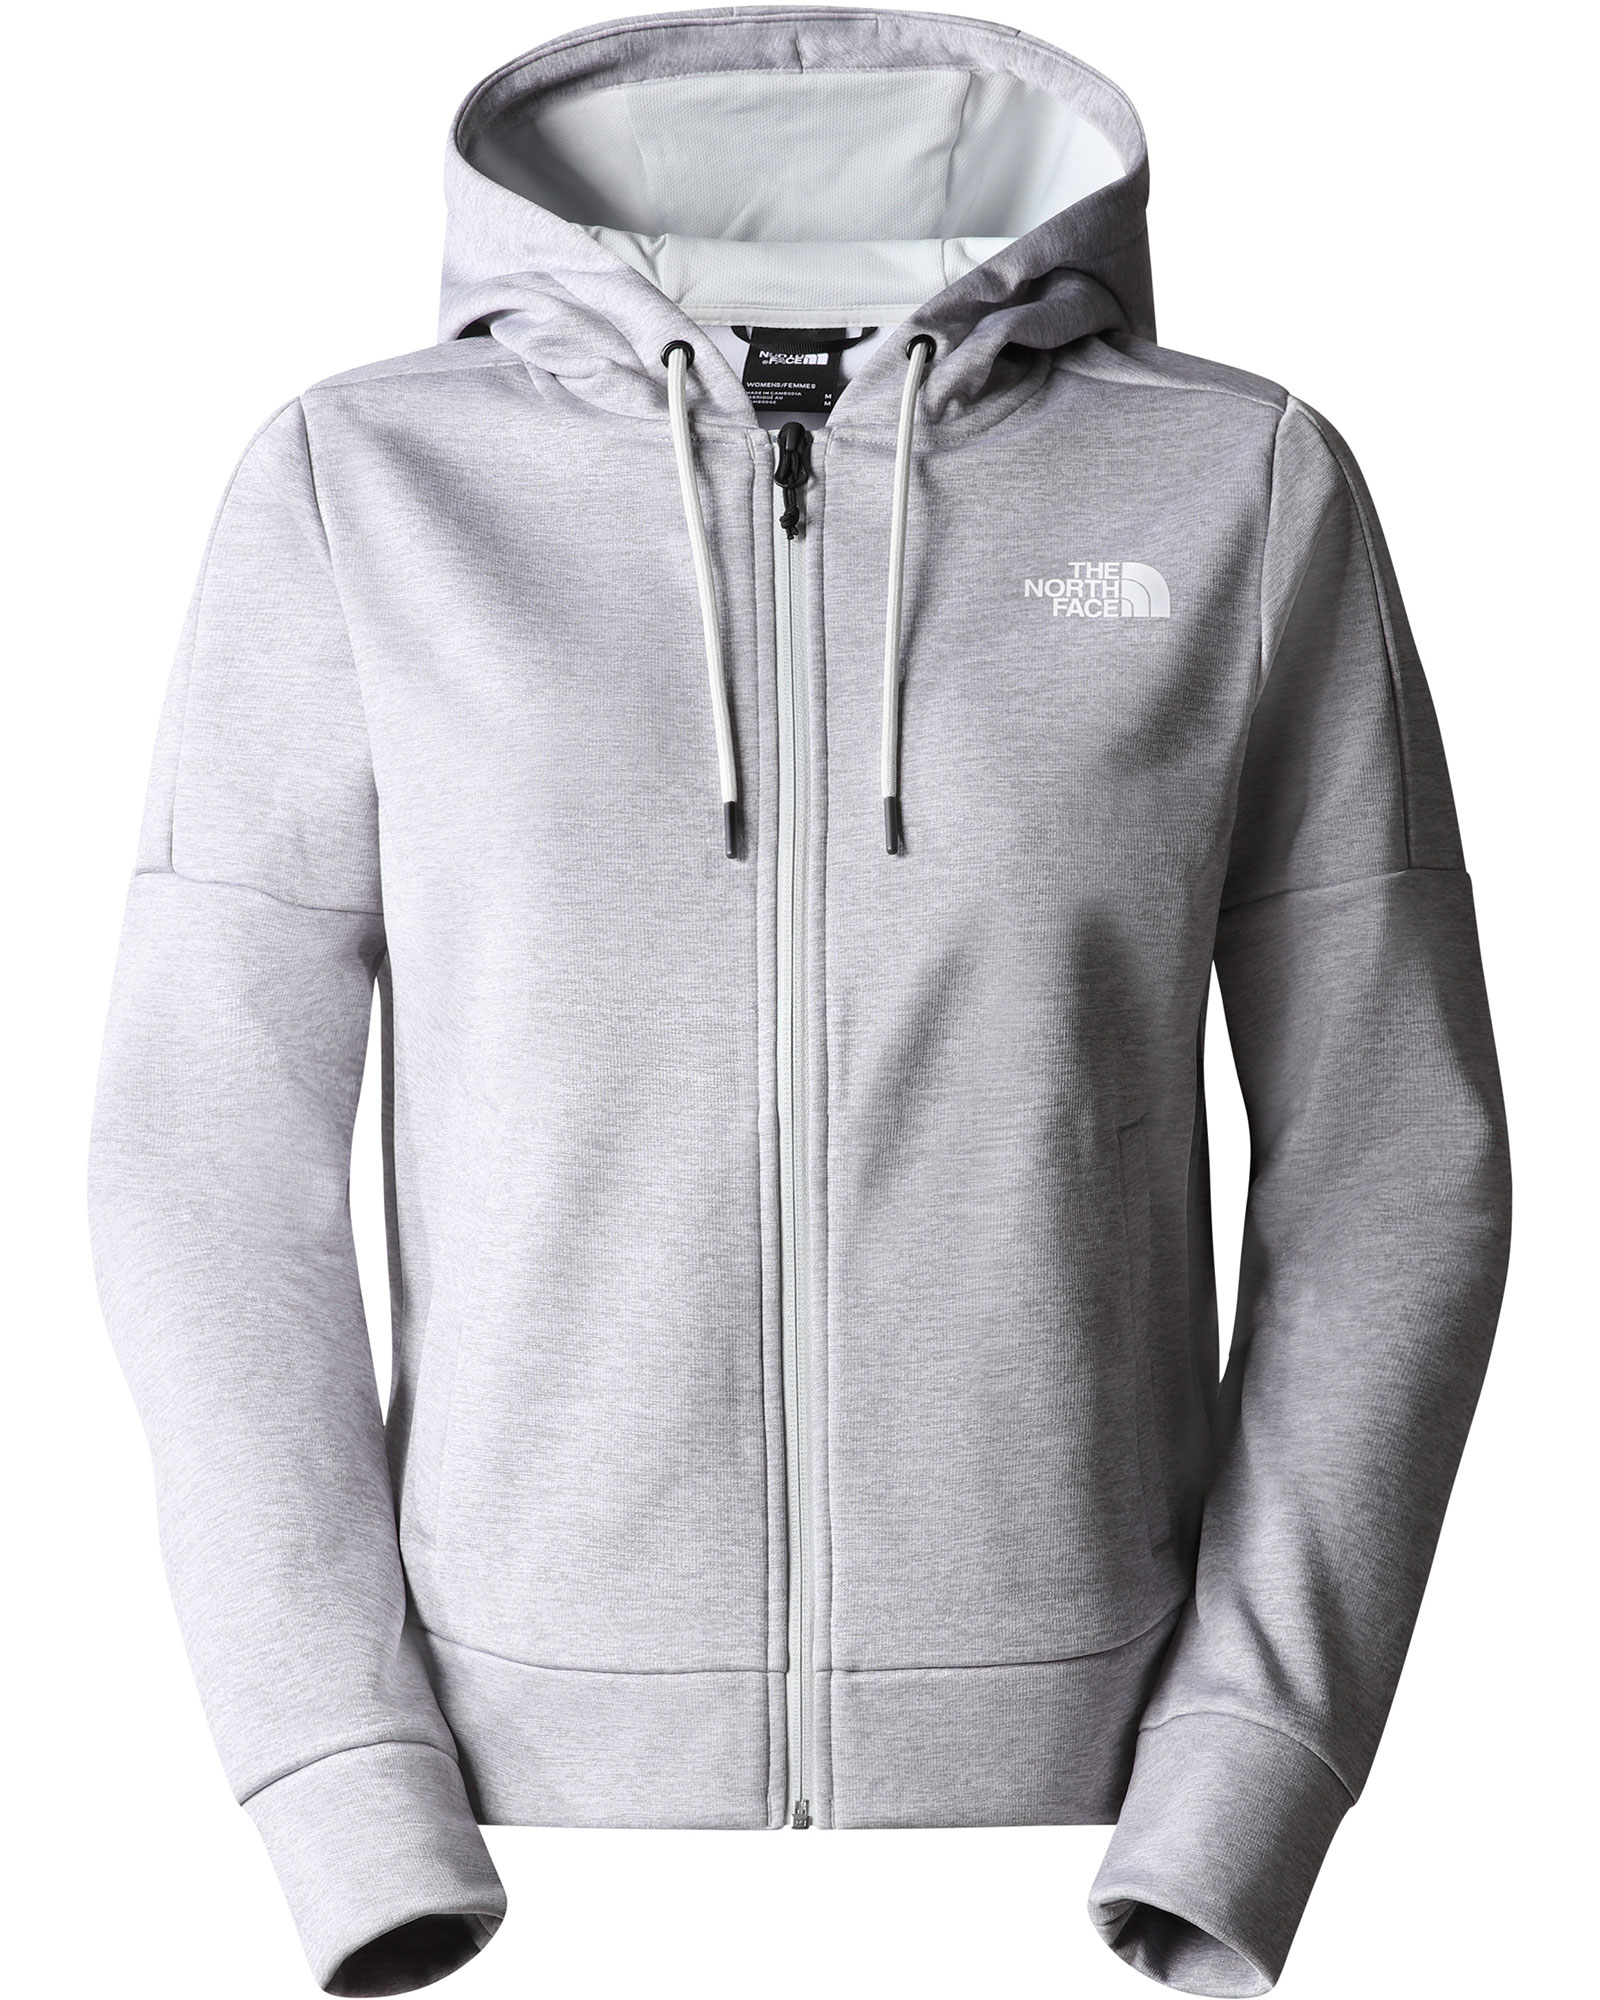 The North Face Reaxion Womens Fleece Full Zip Hoodie